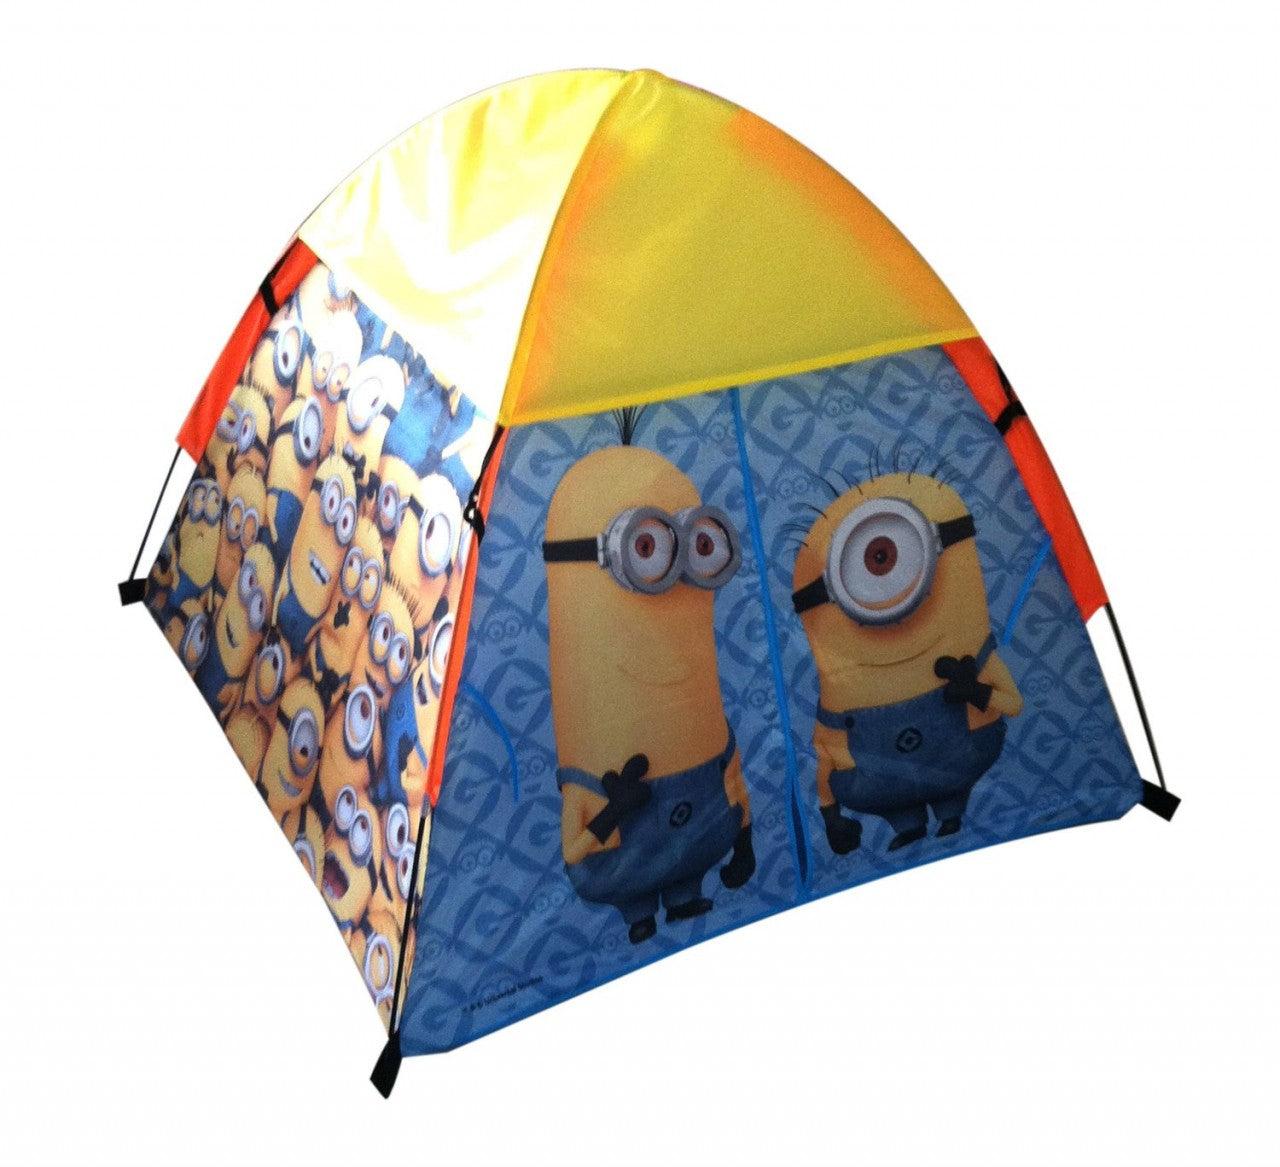 Despicable Me Minions Play Tent SV11136